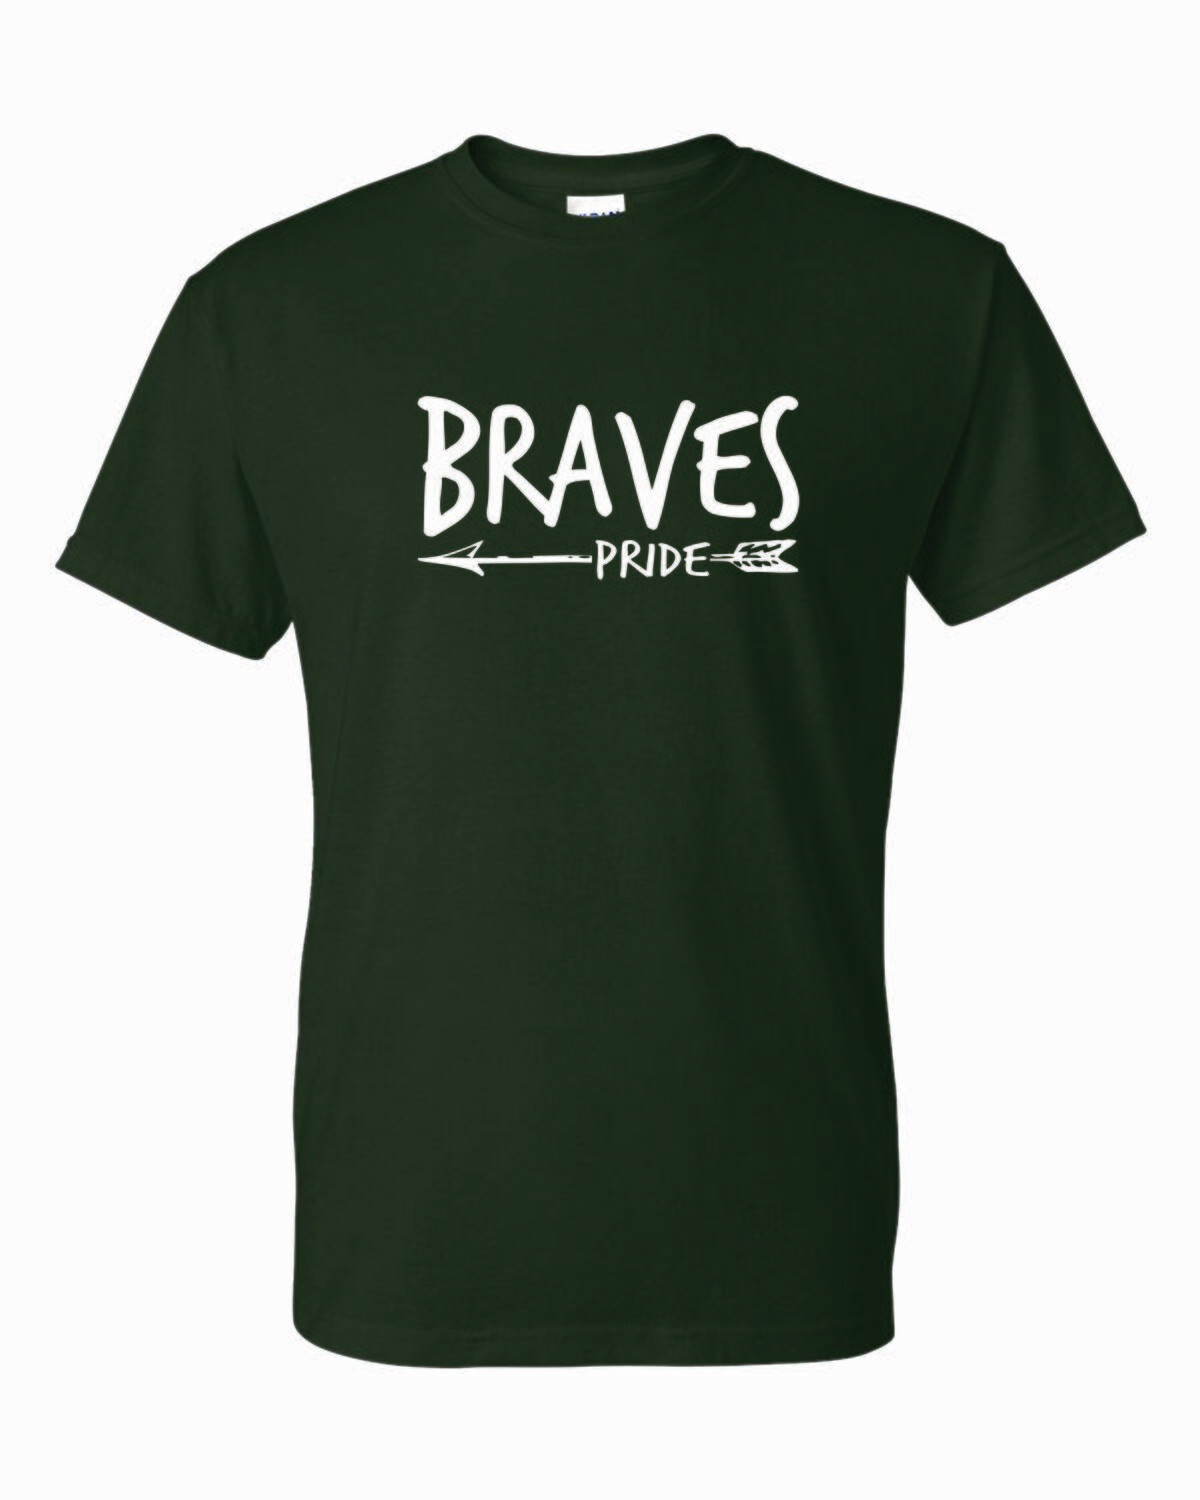 BRAVES PRIDE T-shirt, 6 colors available